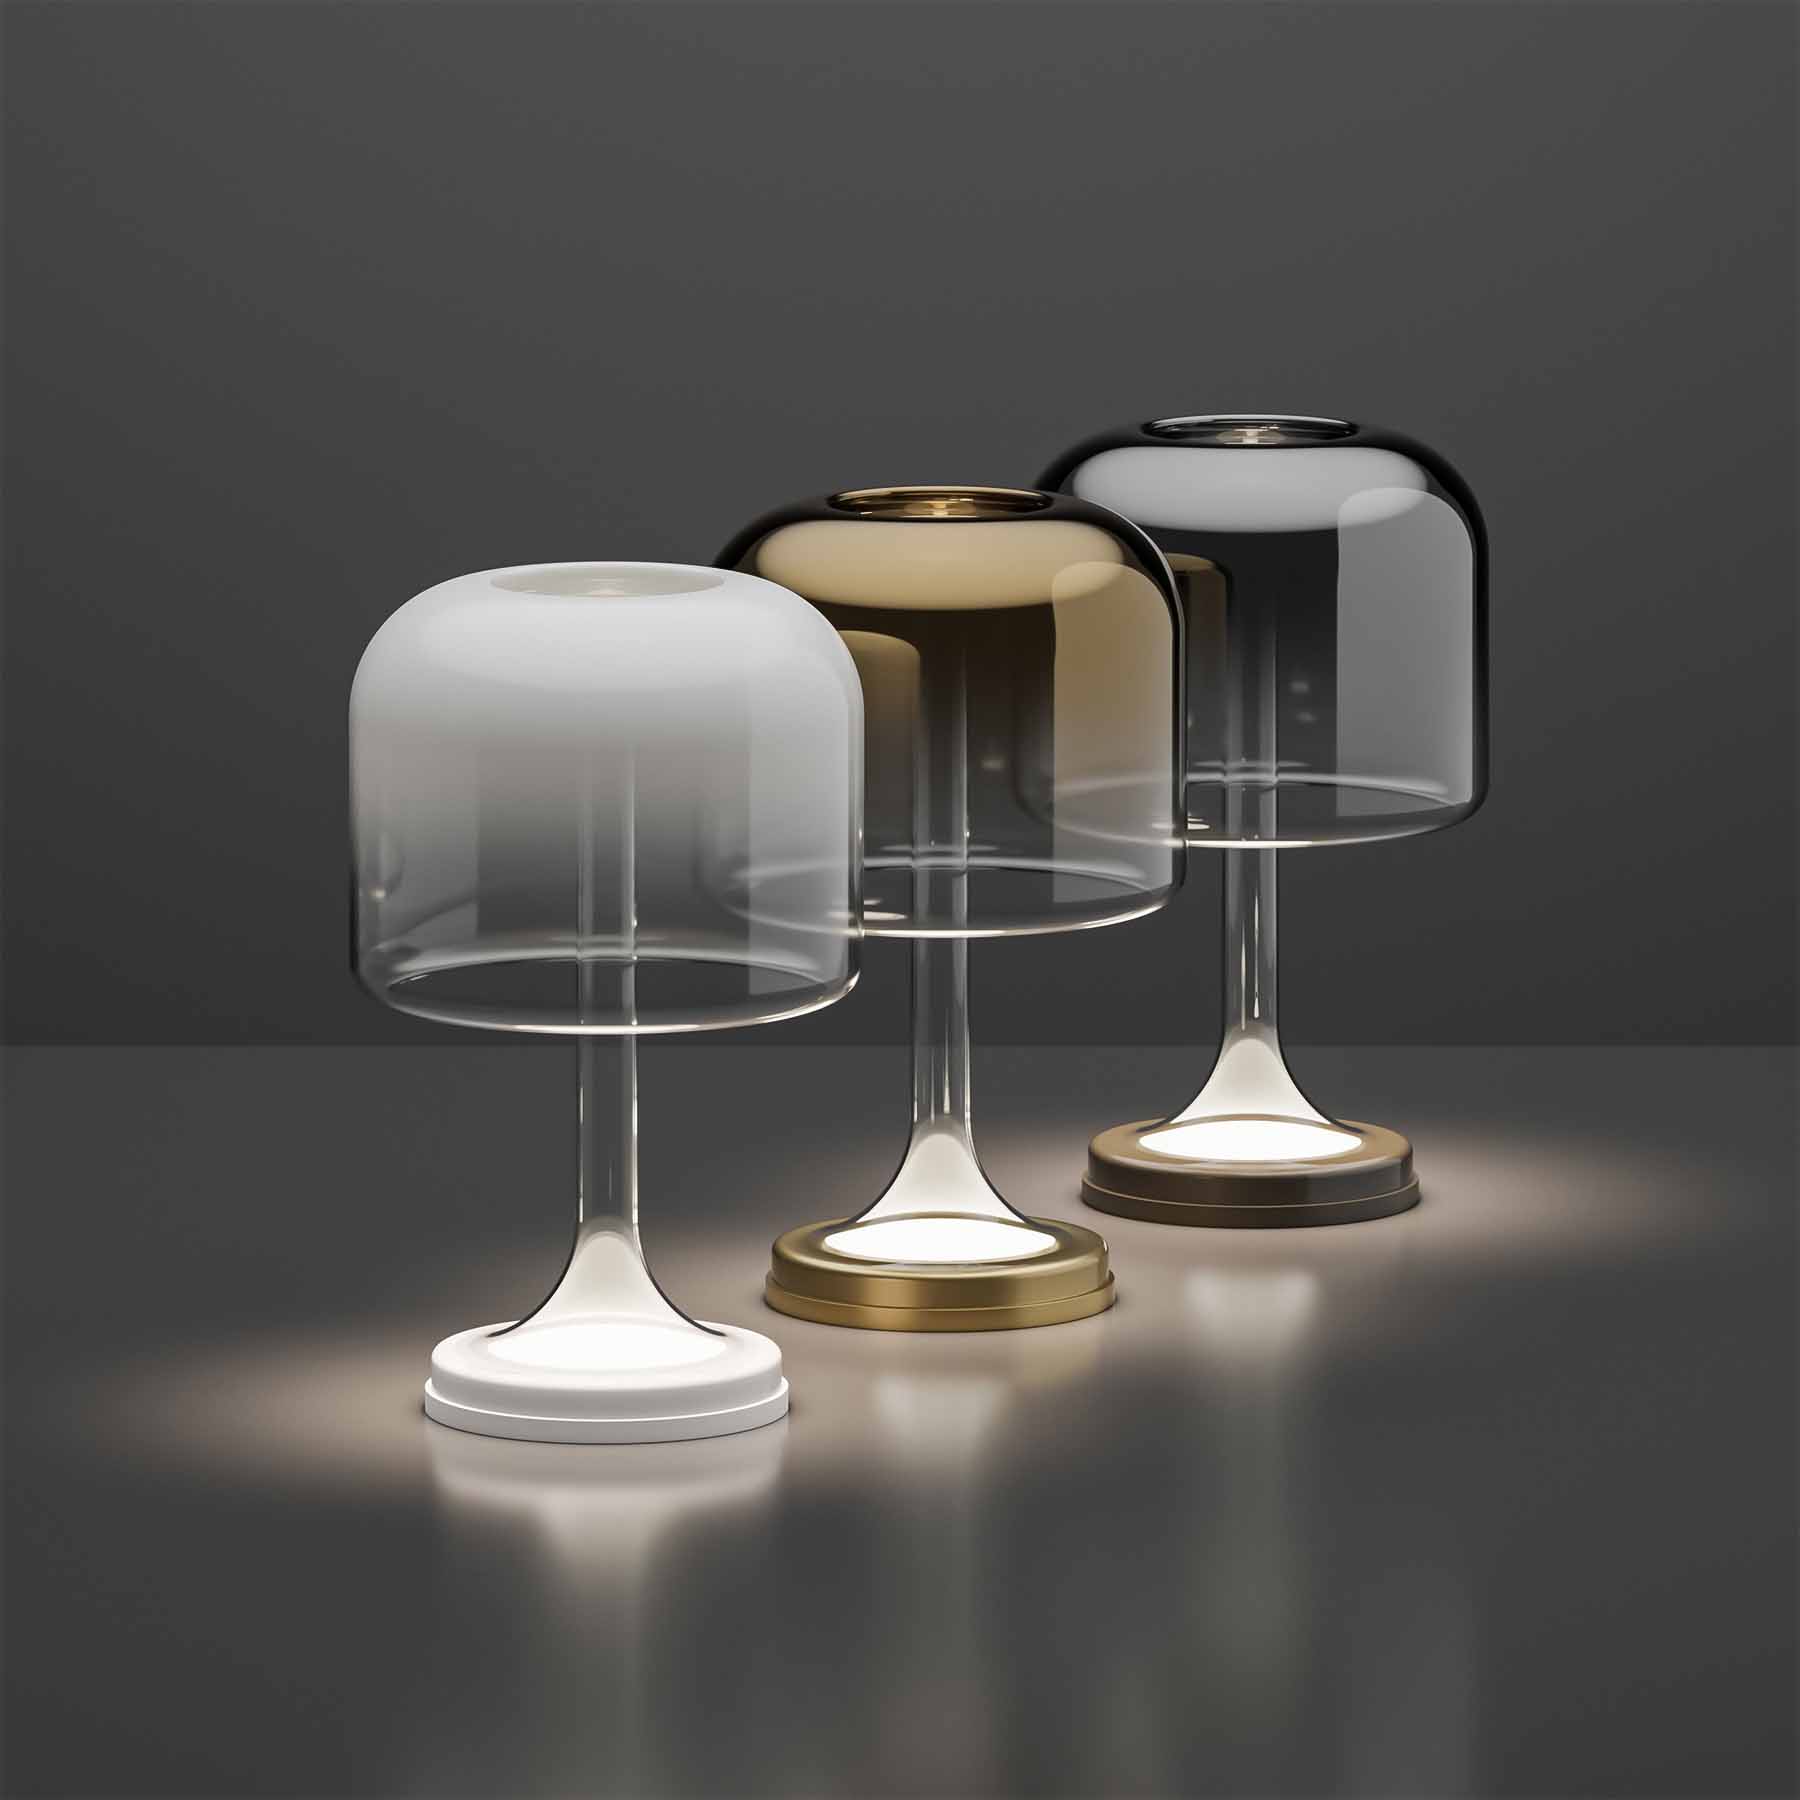 The stylized silhouette of the classic table lamp resembles a magic ball or cast. The lamp resembles a levitating object, its upper ceiling is filled with light, although wires or metal reinforcement do not lead to it. It also feels airy thanks to a transparent silhouette of blown glass.